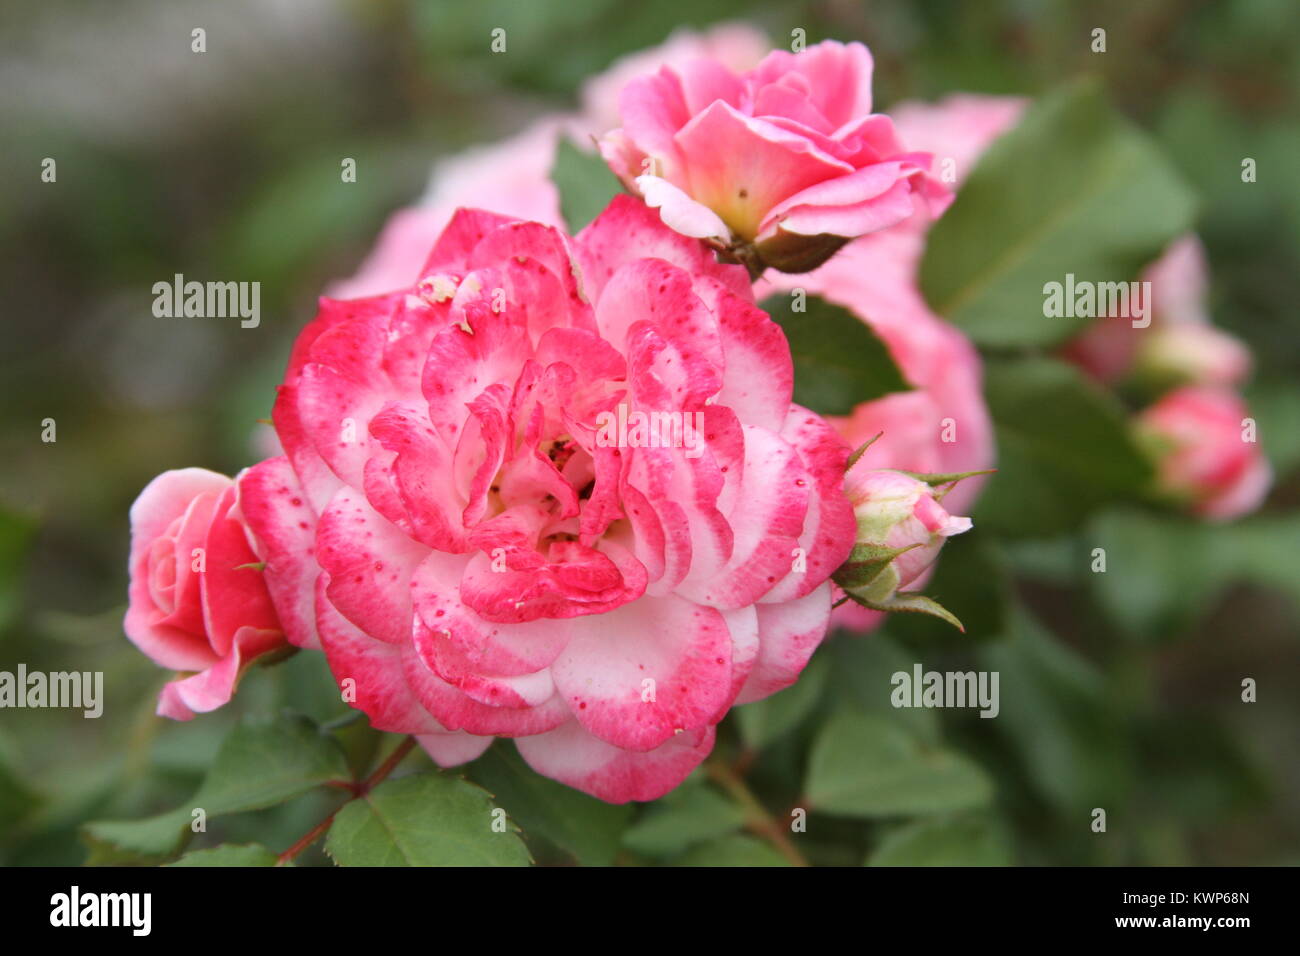 Pink roses with buds in different stages of bloom Stock Photo